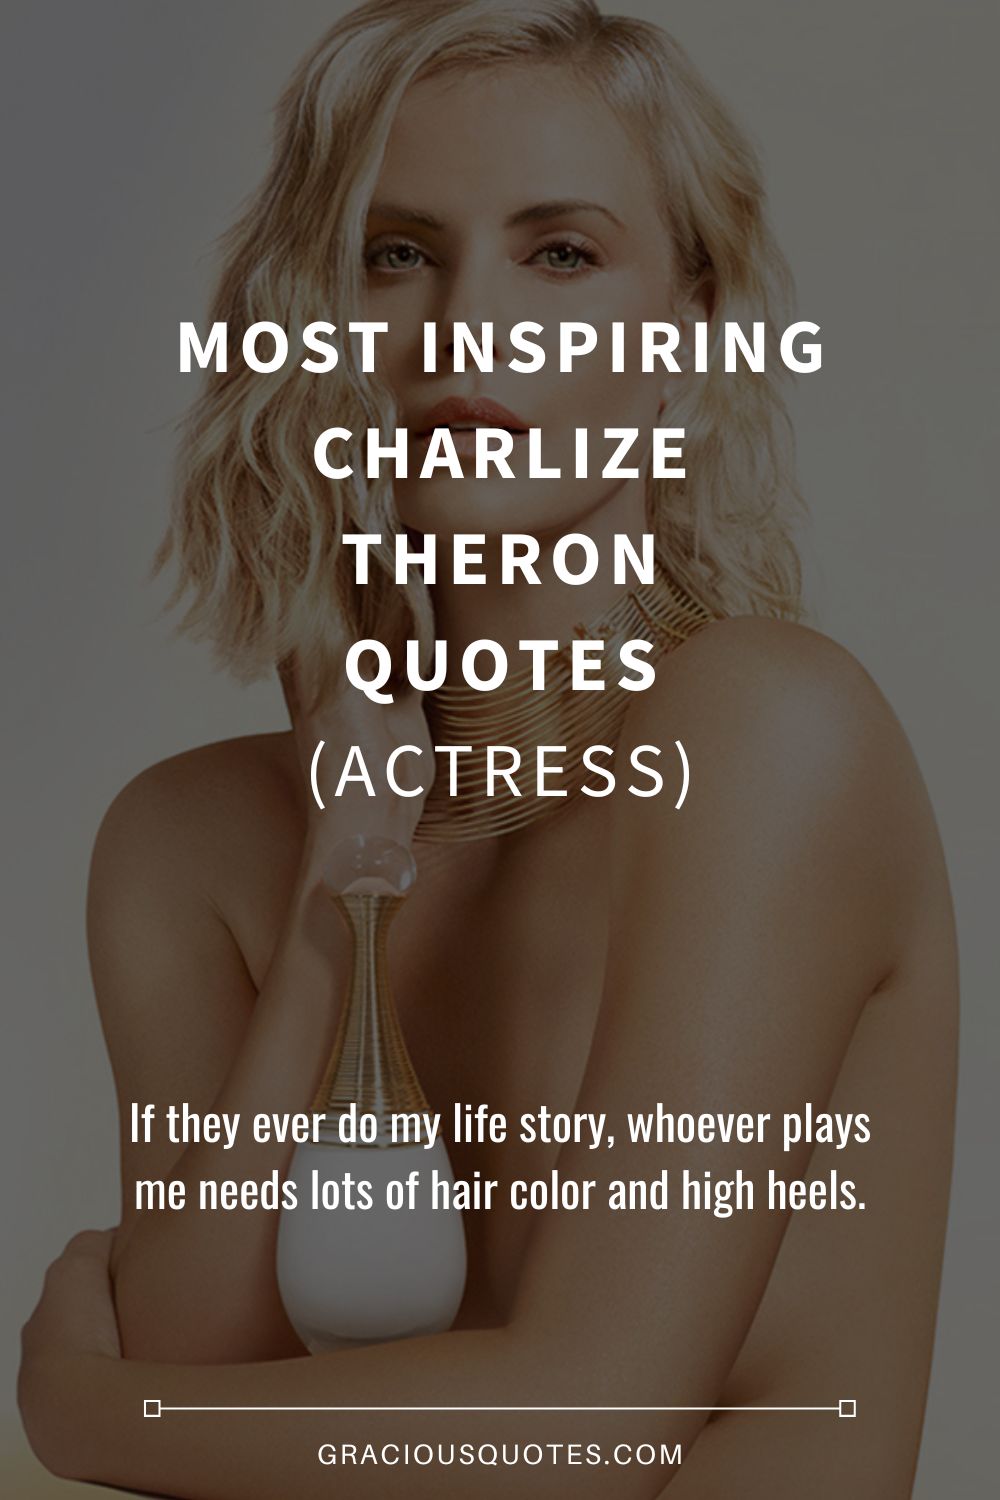 Most Inspiring Charlize Theron Quotes (ACTRESS) - Gracious Quotes